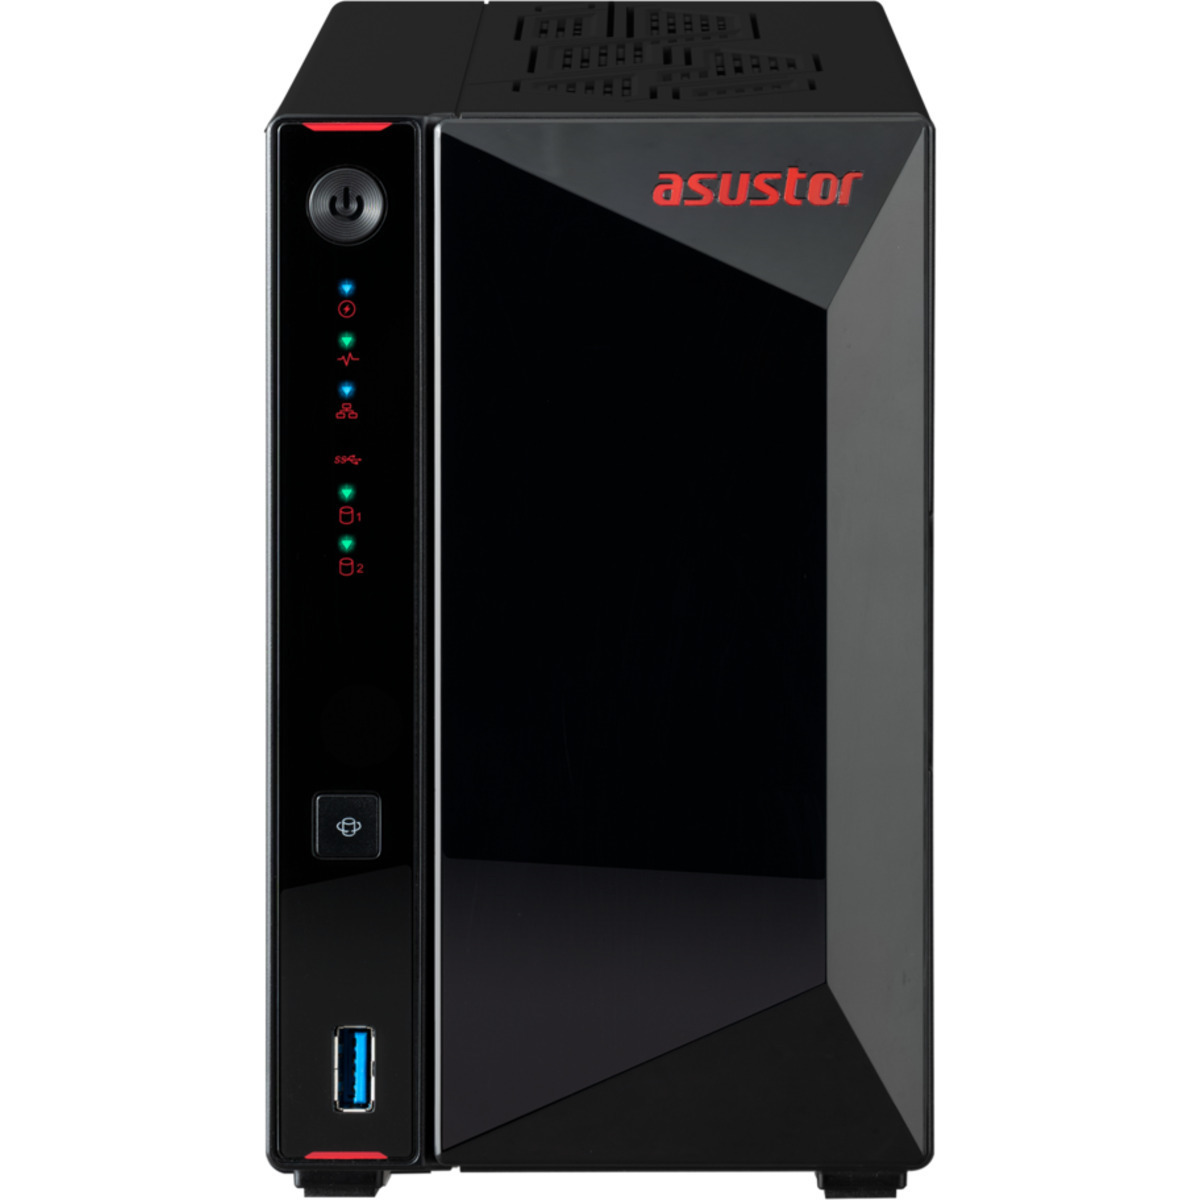 buy ASUSTOR Nimbustor 2 Gen2 AS5402T 4tb Desktop NAS - Network Attached Storage Device 2x2000gb Seagate IronWolf Pro ST2000NT001 3.5 7200rpm SATA 6Gb/s HDD NAS Class Drives Installed - Burn-In Tested - FREE RAM UPGRADE - nas headquarters buy network attached storage server device das new raid-5 free shipping simply usa Nimbustor 2 Gen2 AS5402T